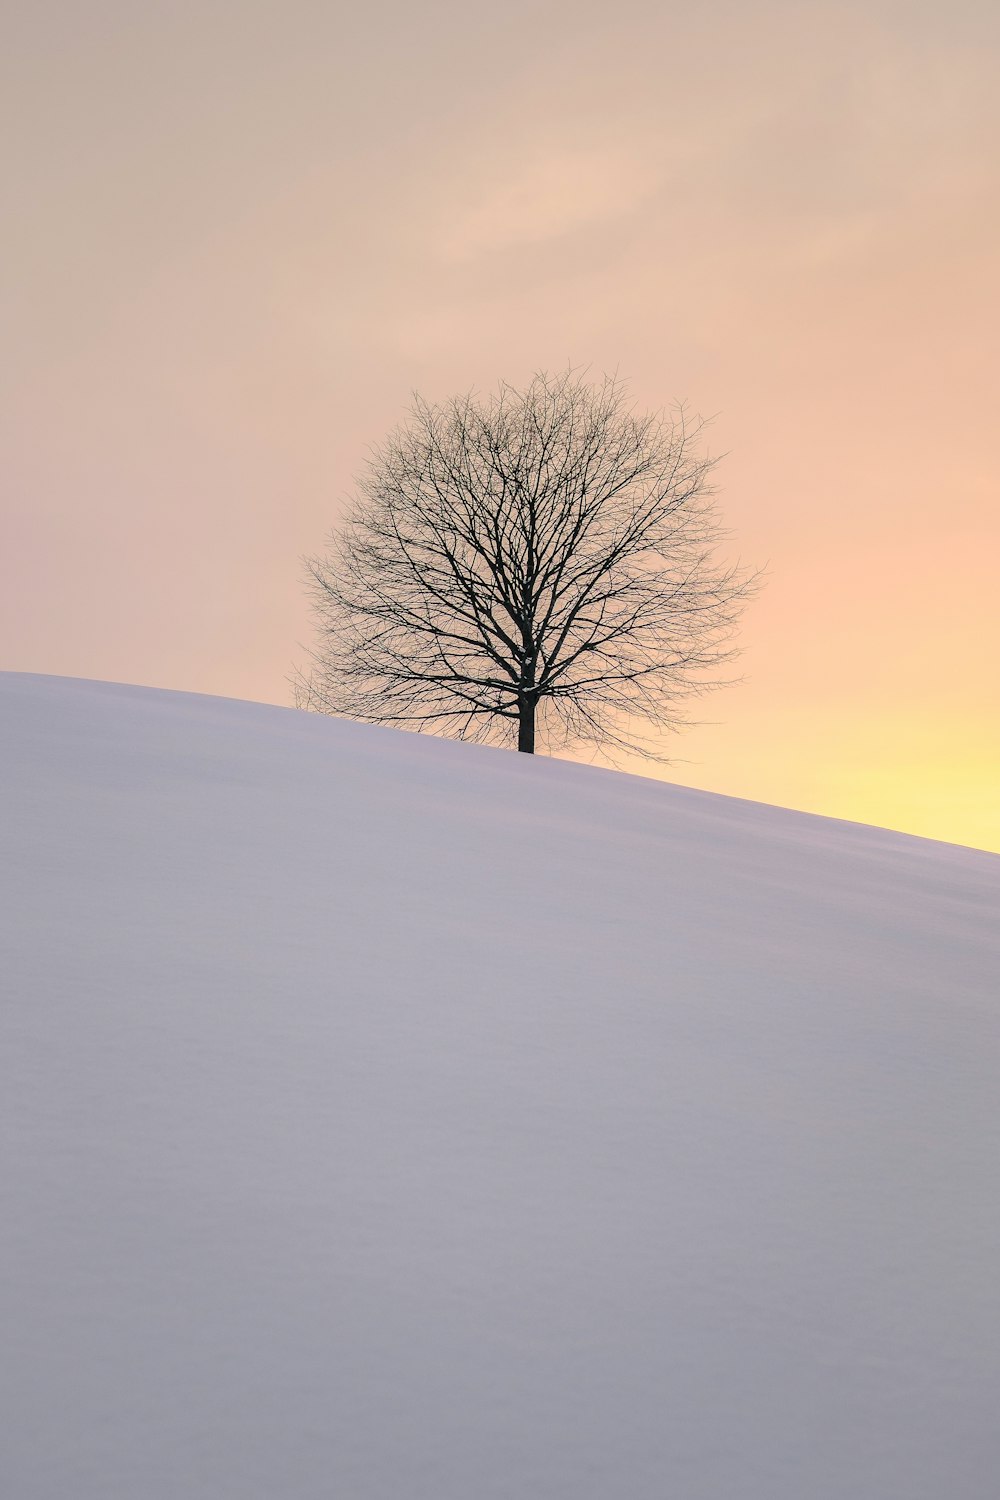 leafless tree on the hill